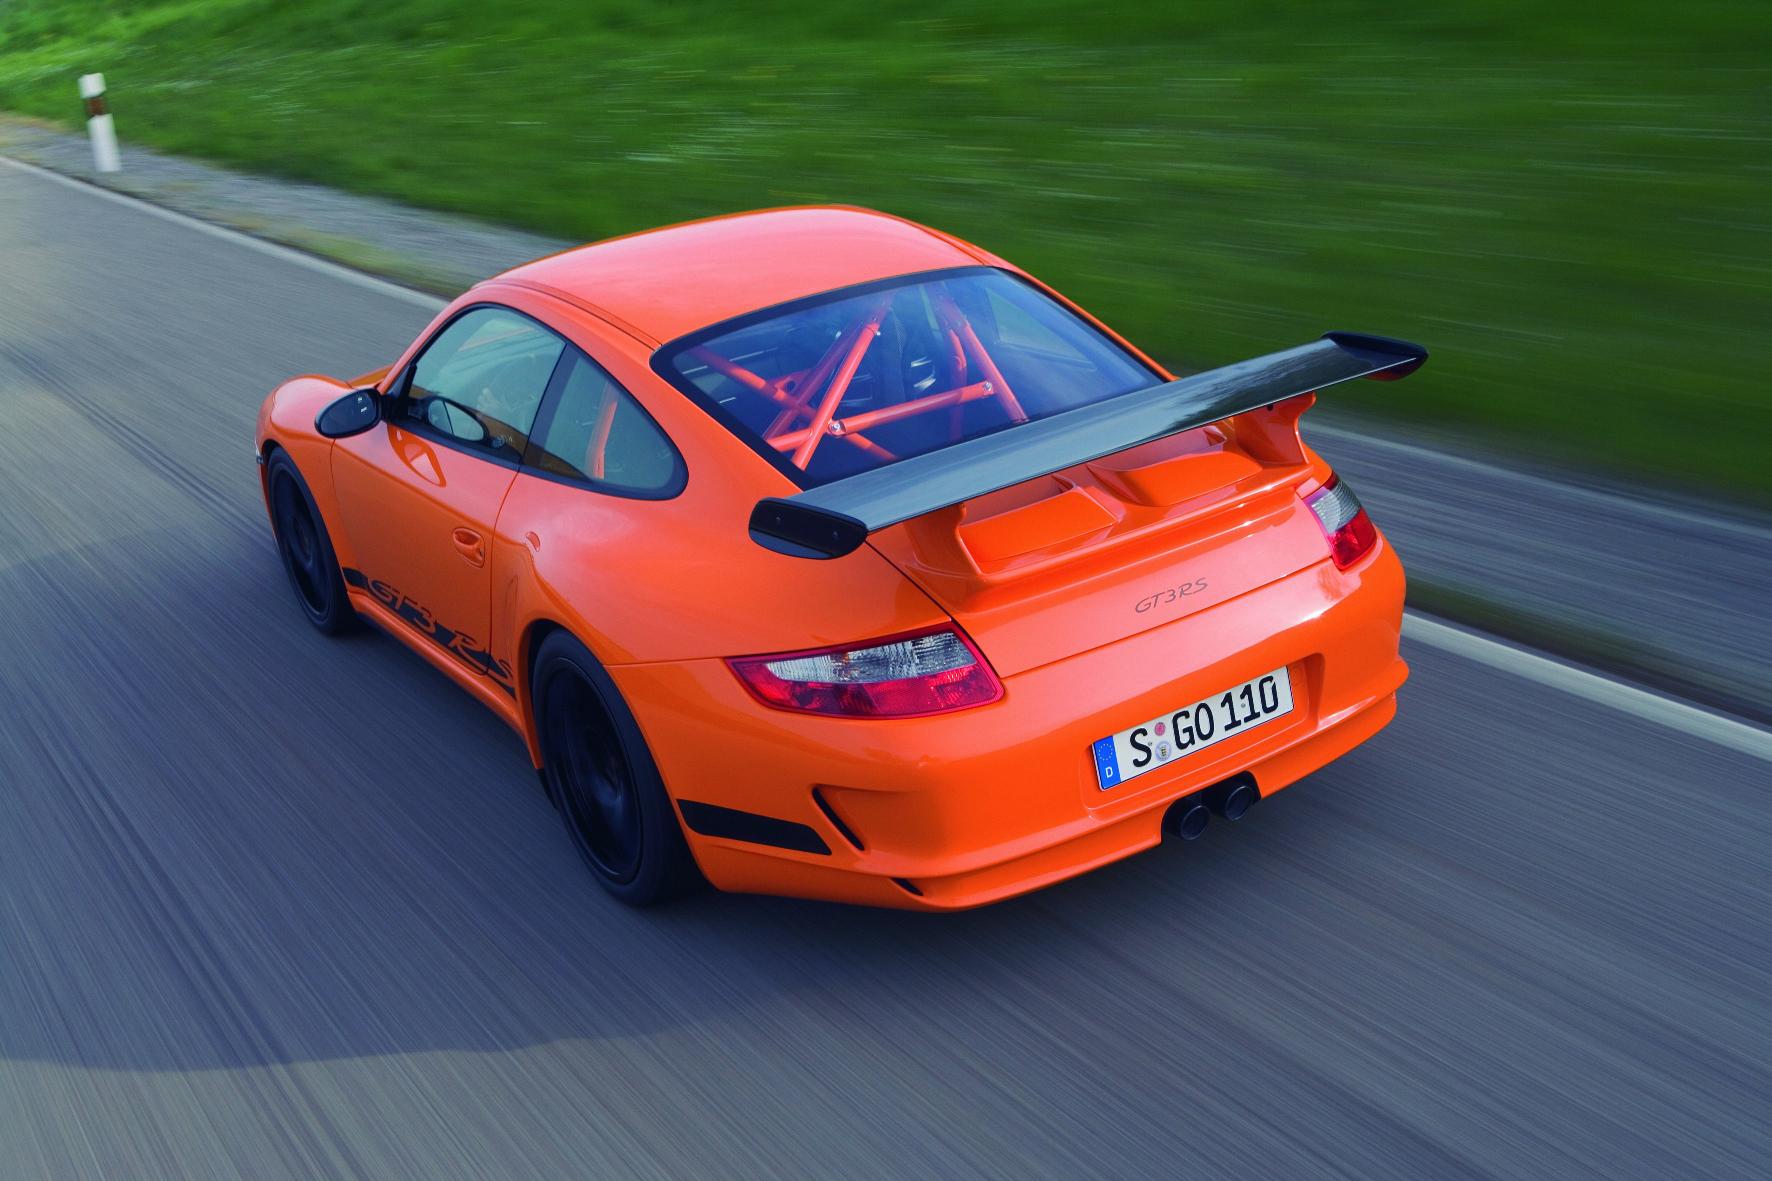 New 991 Porsche 911 GT3 RS delayed due to fire recall